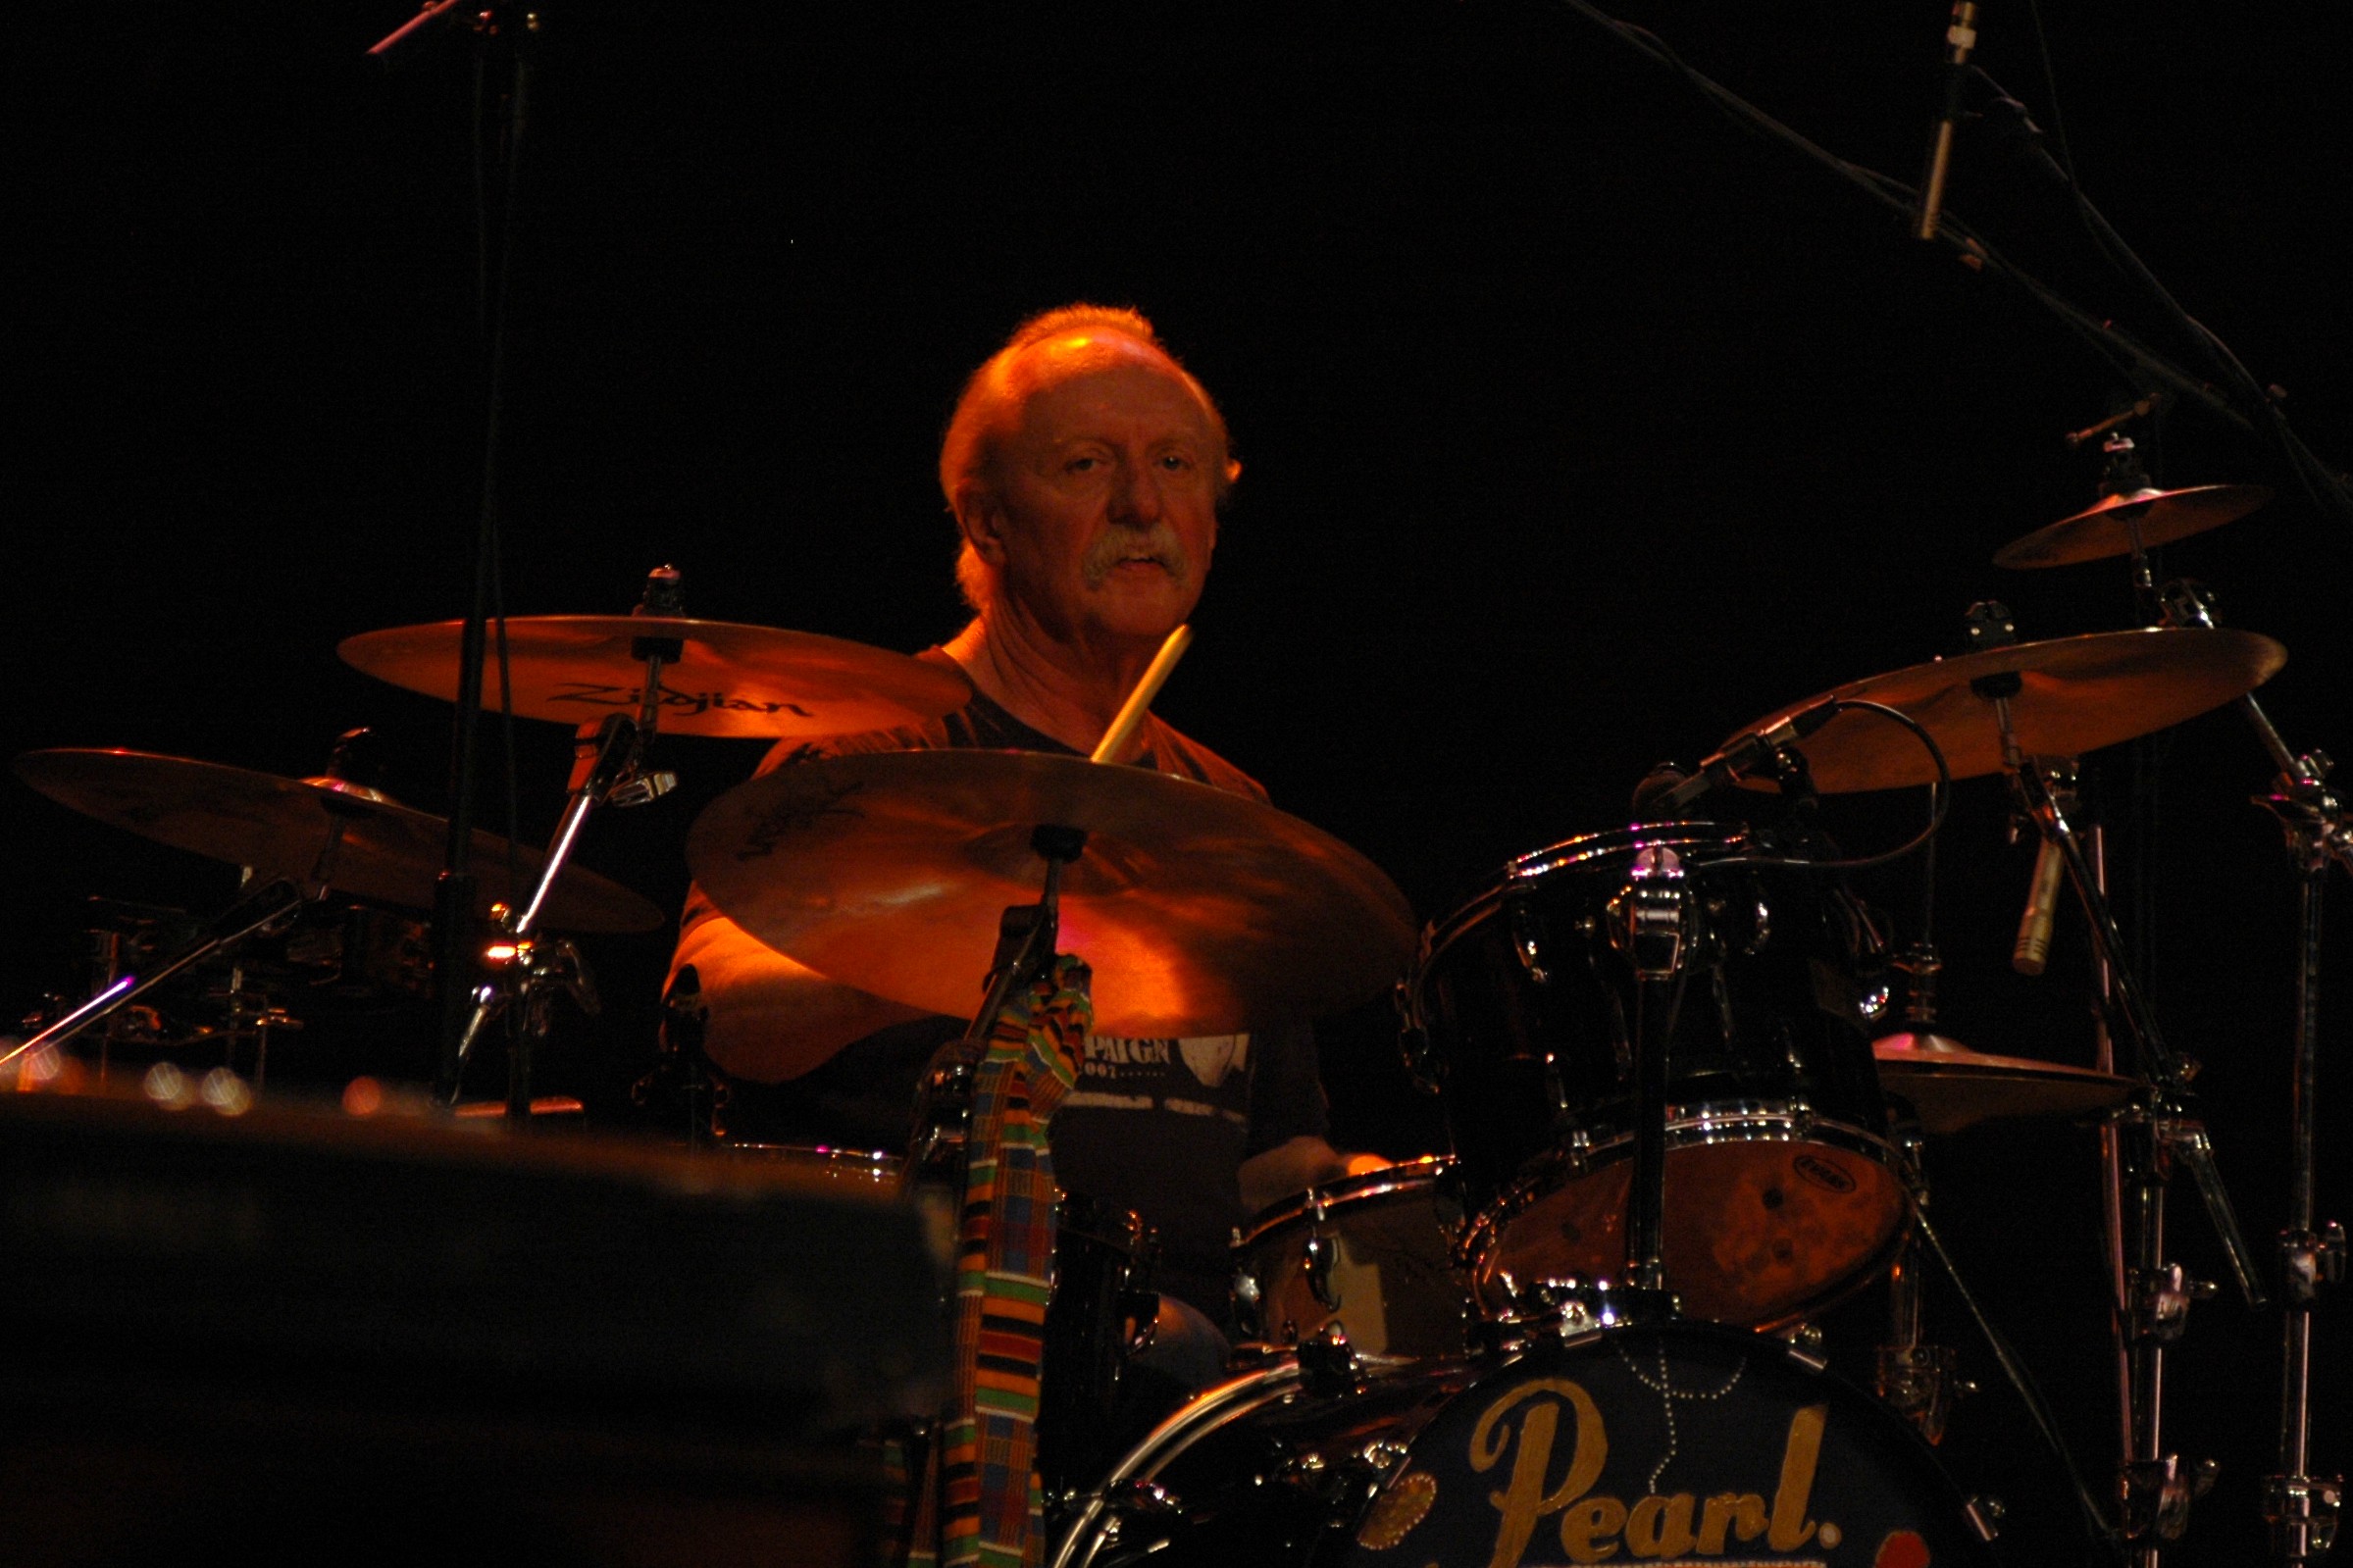 post about Florida Probate Litigation: Allman Brothers Band Co-Founder, Butch Trucks, Dies in West Palm Beach, Florida